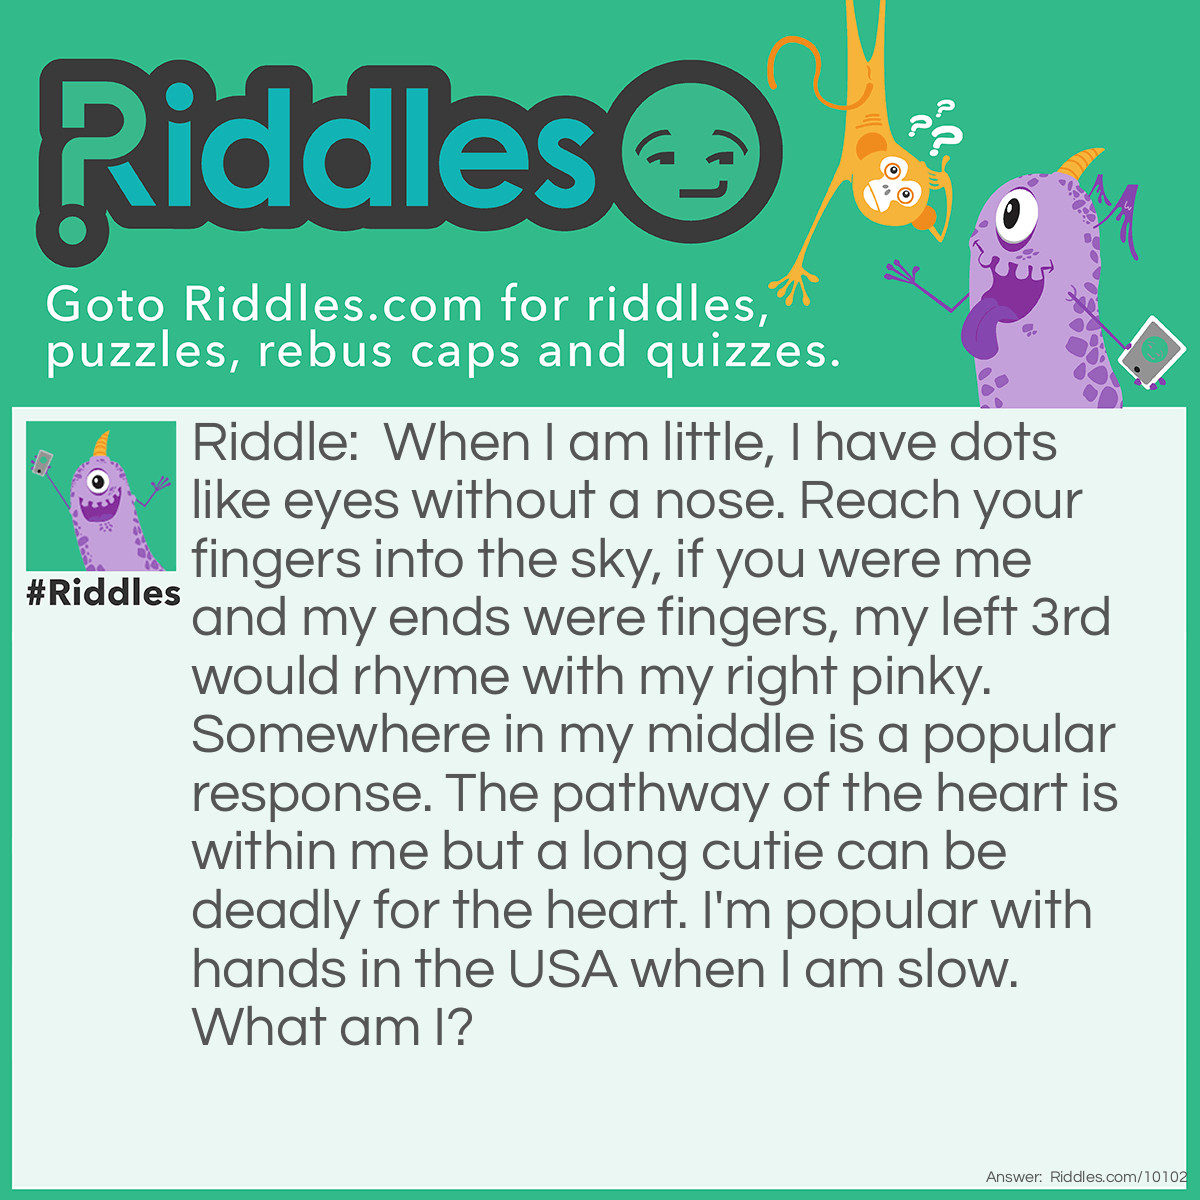 Riddle: When I am little, I have dots like eyes without a nose. Reach your fingers into the sky, if you were me and my ends were fingers, my left 3rd would rhyme with my right pinky. Somewhere in my middle is a popular response. The pathway of the heart is within me but a long cutie can be deadly for the heart. I'm popular with hands in the USA when I am slow. What am I? Answer: I don't know the answer myself